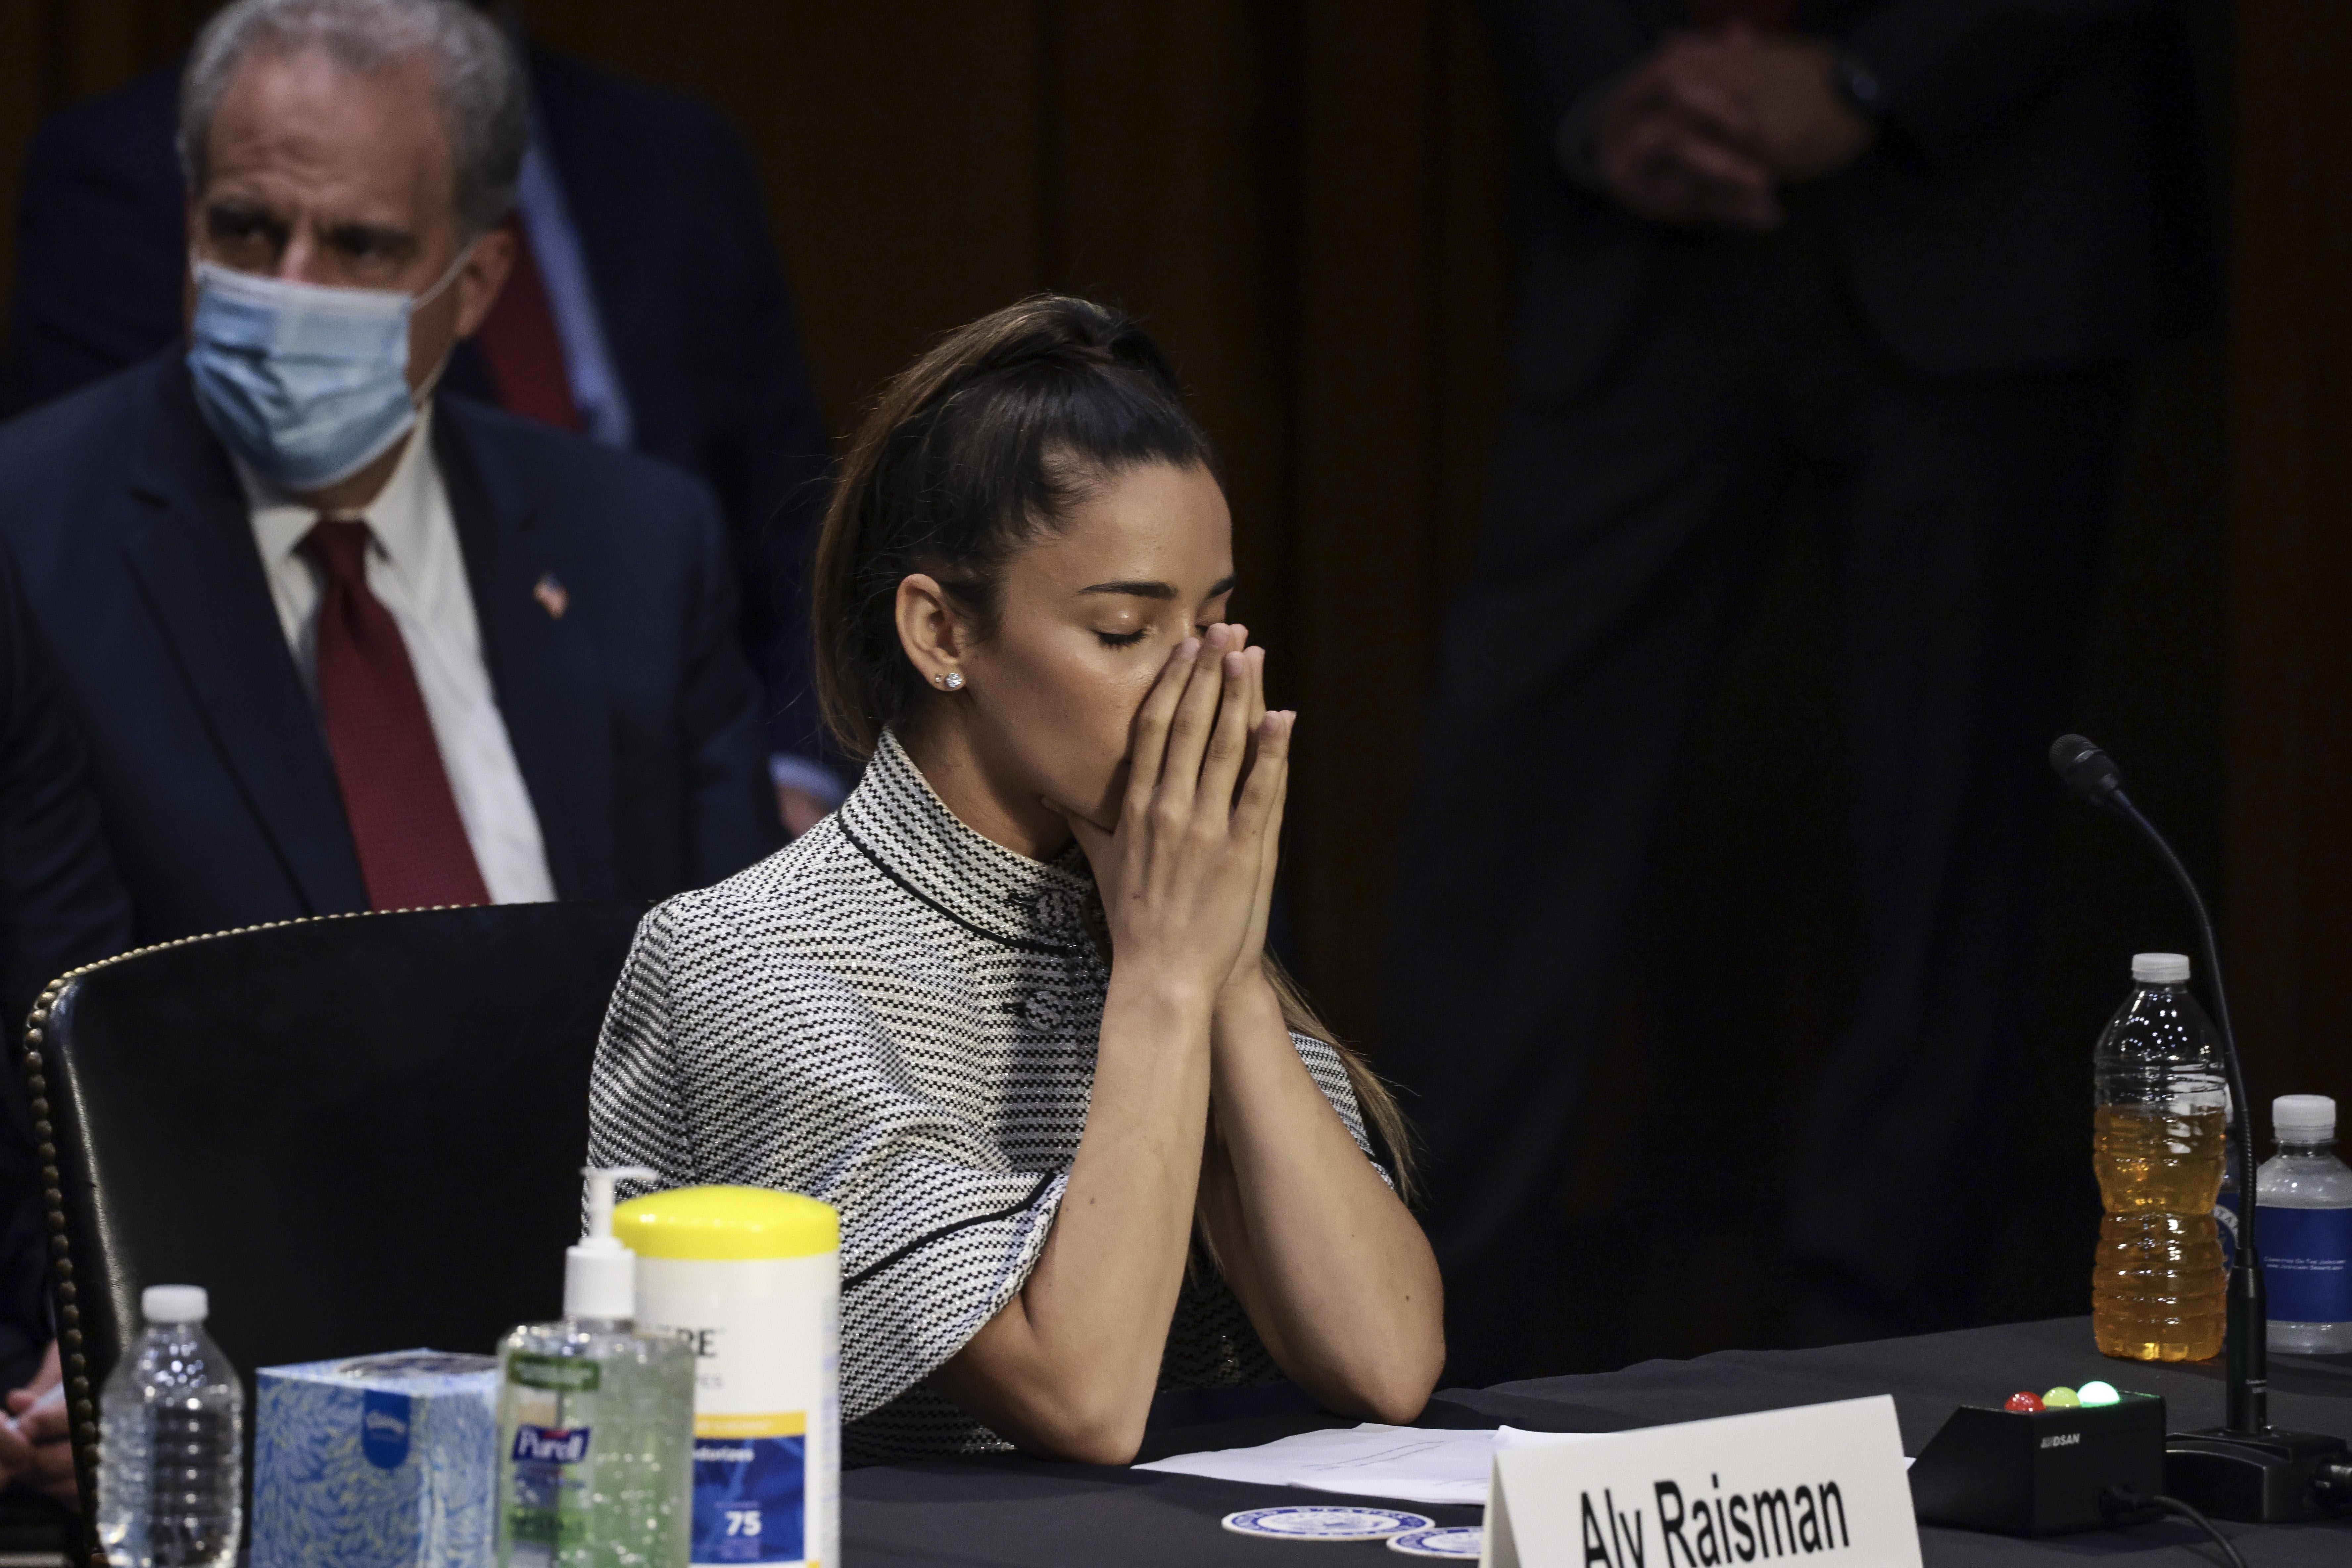 WASHINGTON, DC - SEPTEMBER 15: U.S. Olympic Gymnast Aly Raisman closes her eyes as U.S. Olympic Gymnast McKayla Maroney gives testimony during a Senate Judiciary hearing about the Inspector General's report on the FBI handling of the Larry Nassar investigation of sexual abuse of Olympic gymnasts, on Capitol Hill on September 15, 2021 in Washington, DC. Raisman and other fellow U.S. Gymnasts gave testimony on the abuse they experienced at the hand of Larry Nassar, the former US women's national gymnastics team doctor, and the FBI’s lack of urgency when handling their cases. (Photo by Anna Moneymaker/Getty Images)